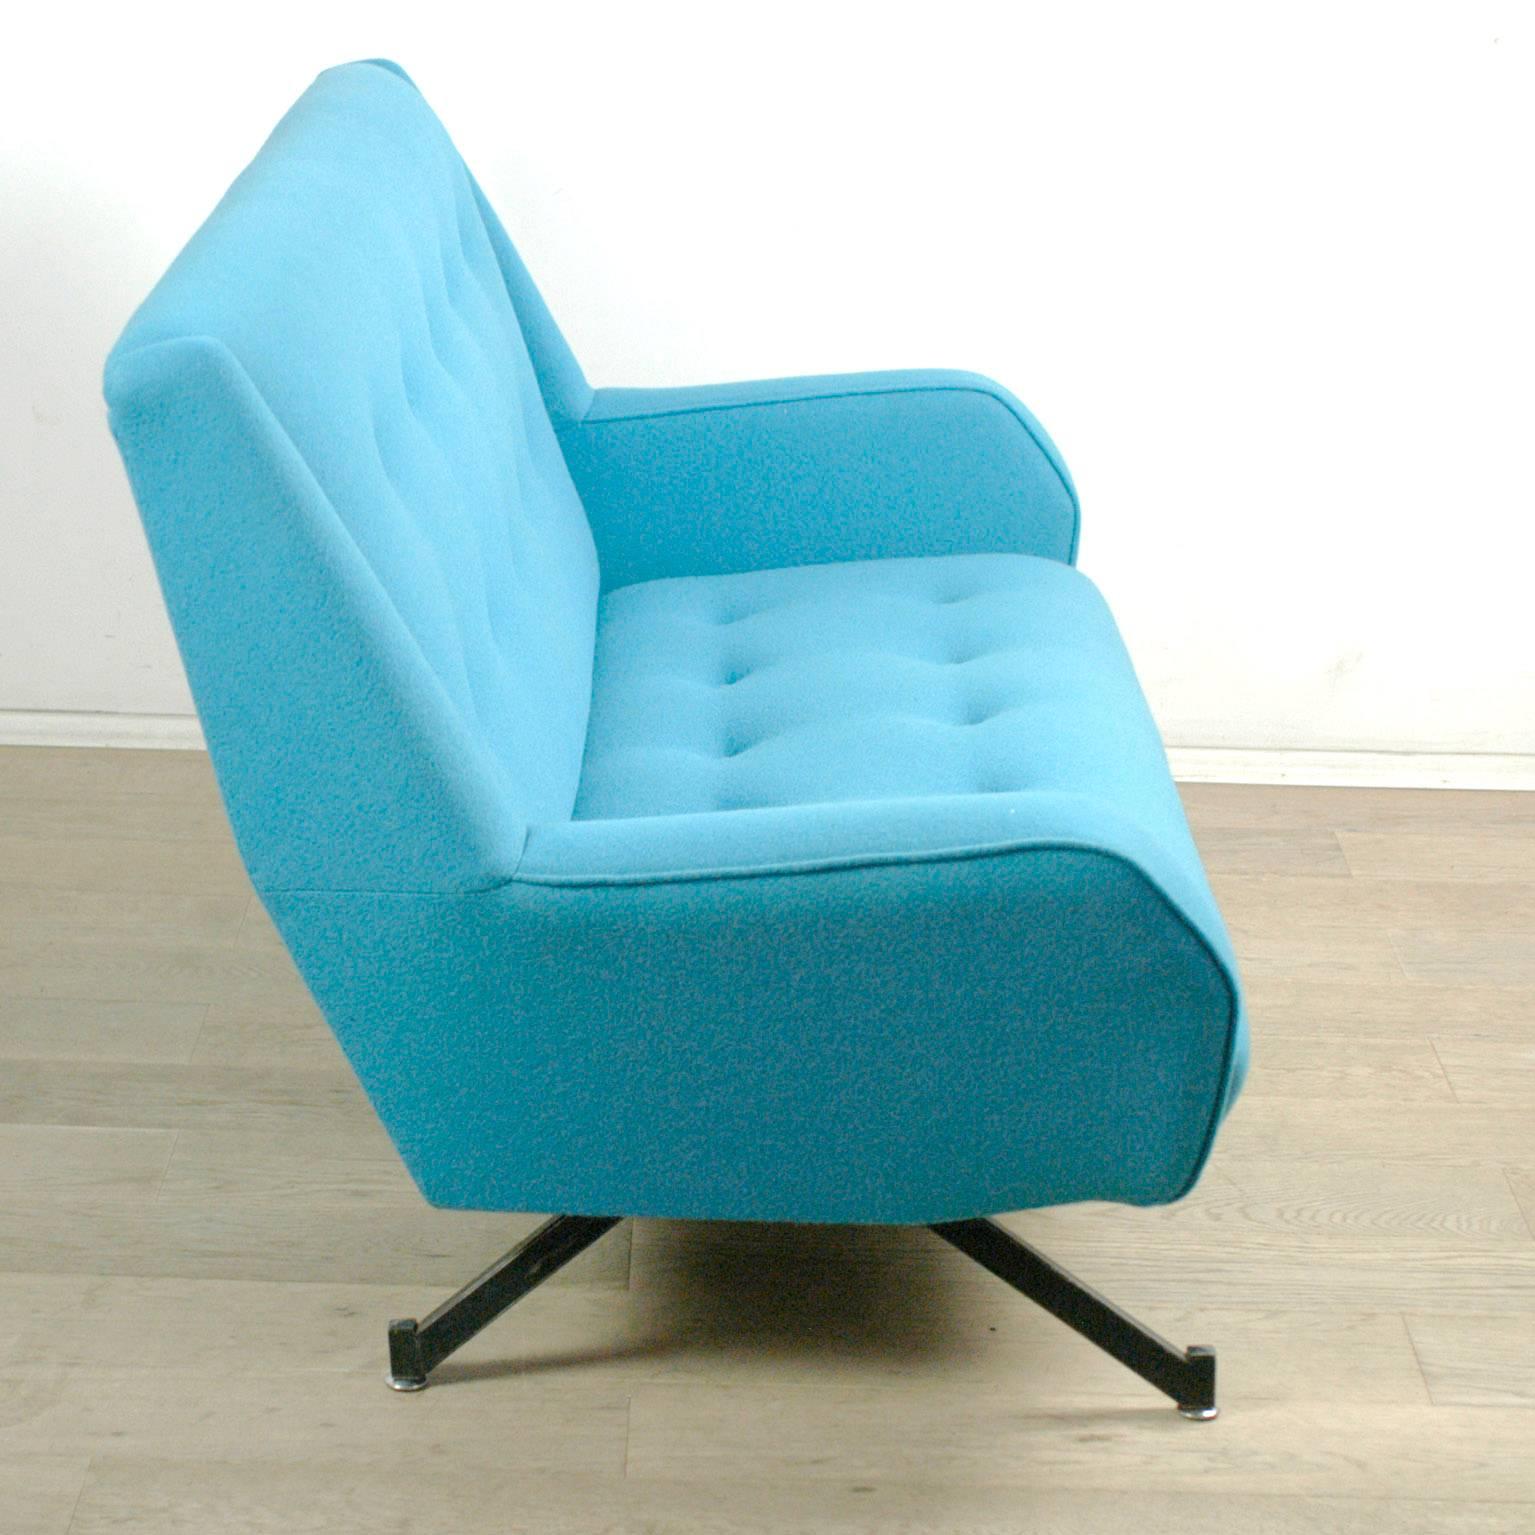 Blue and Black Metall Italian Midcentury Sofa in the Style of Ico Parisi (Moderne der Mitte des Jahrhunderts)